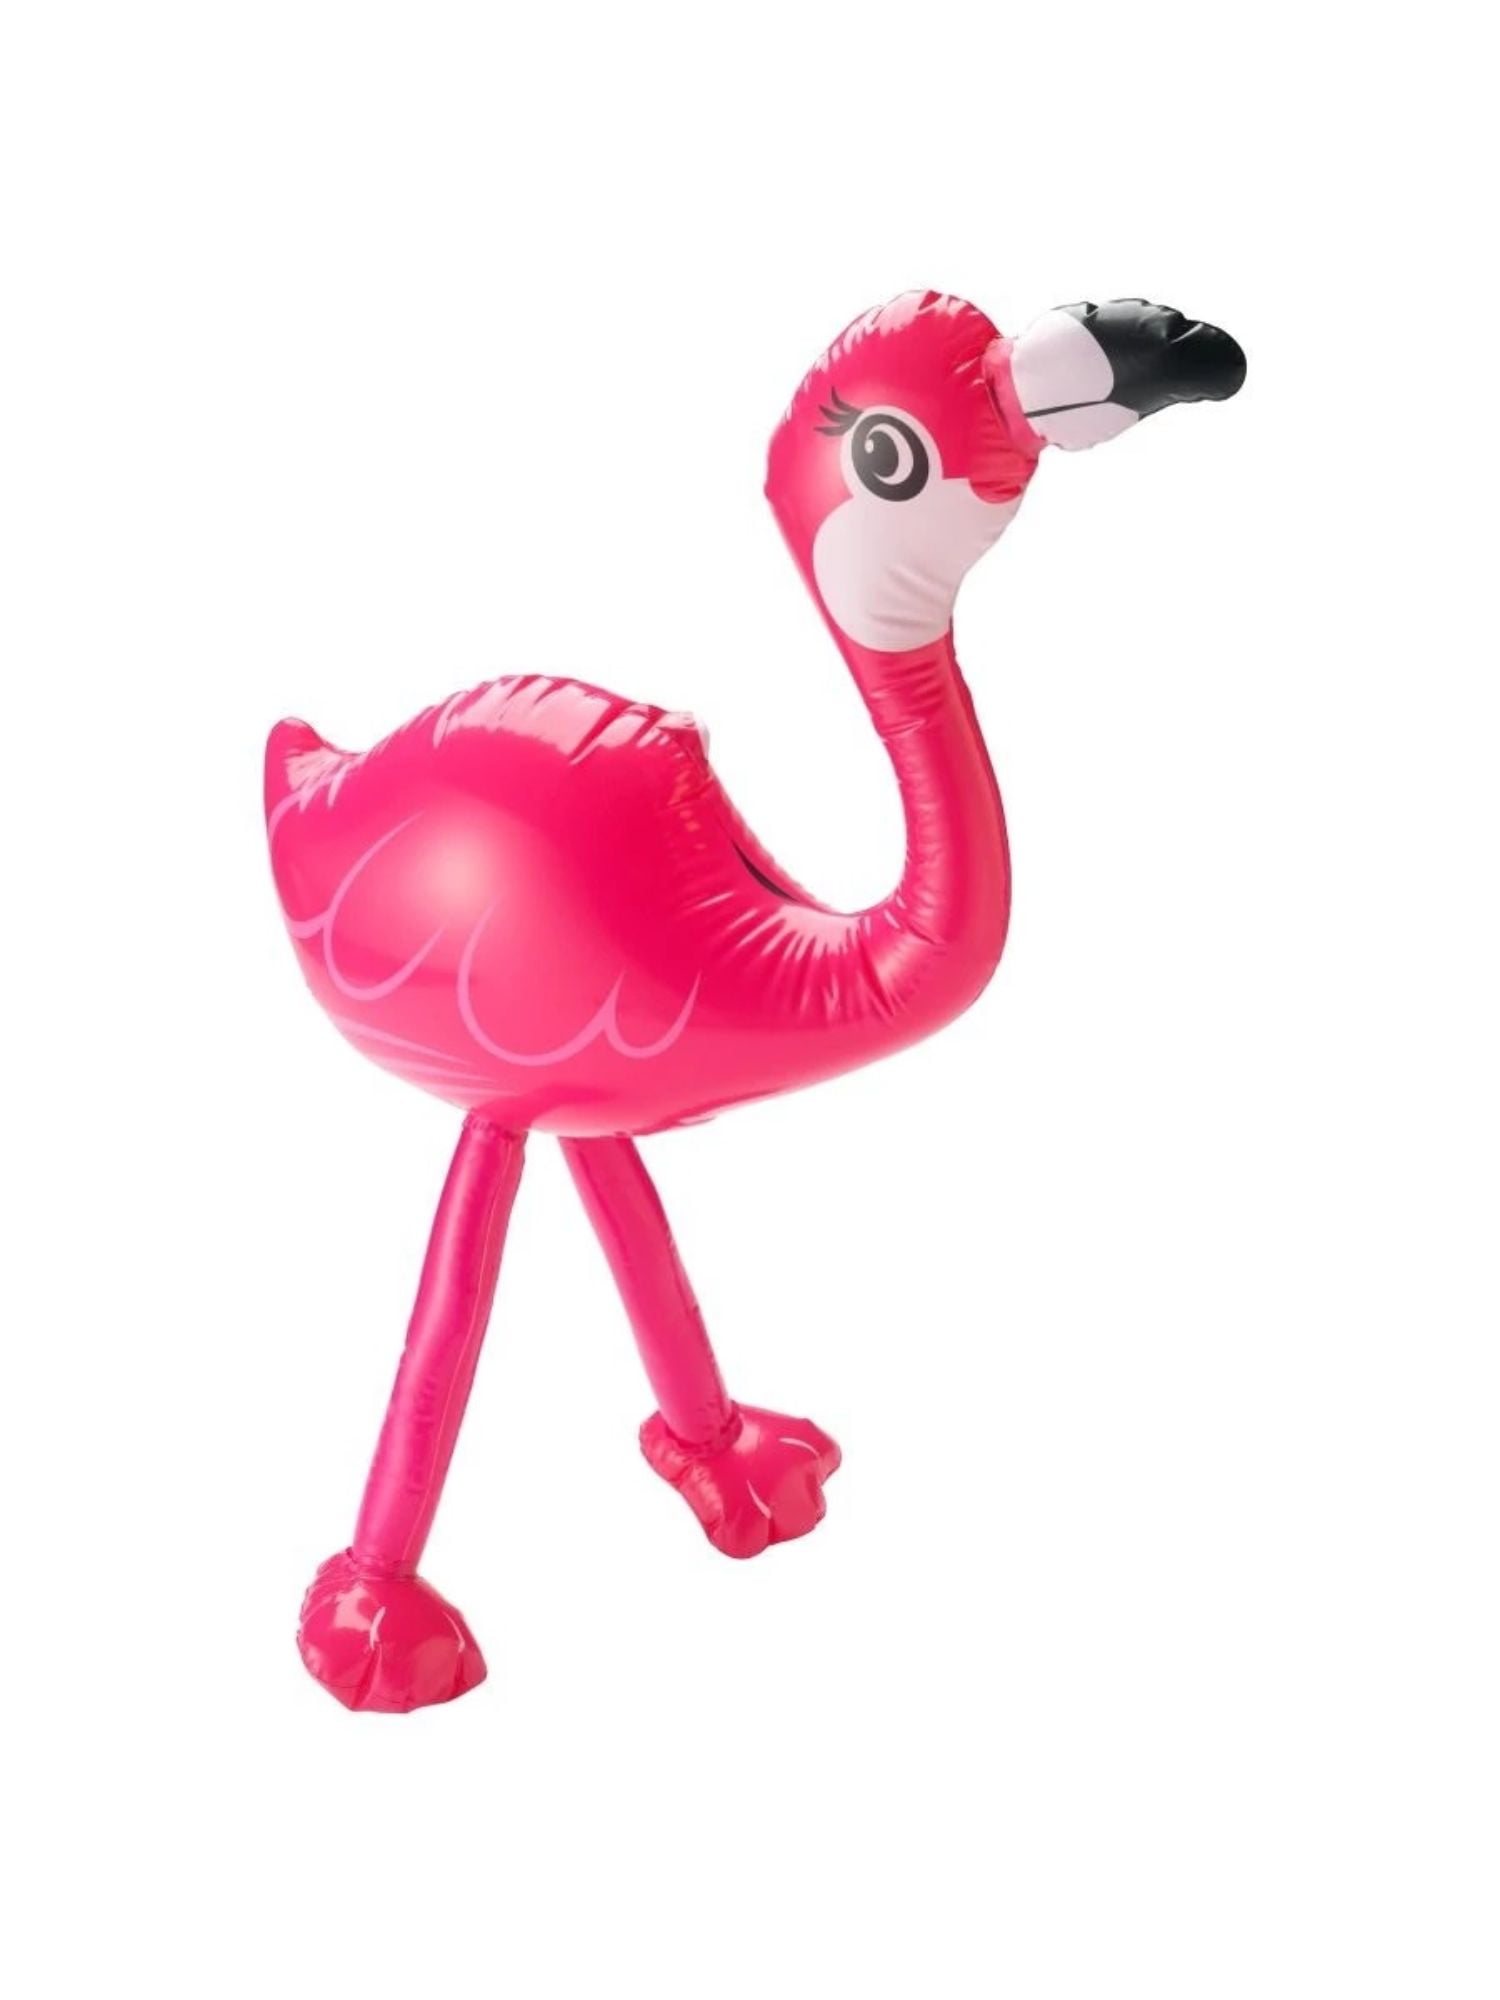 Pink Flamingo 64cm Inflatable Blow Up Animal Party Decoration Novelty Pool Toy 